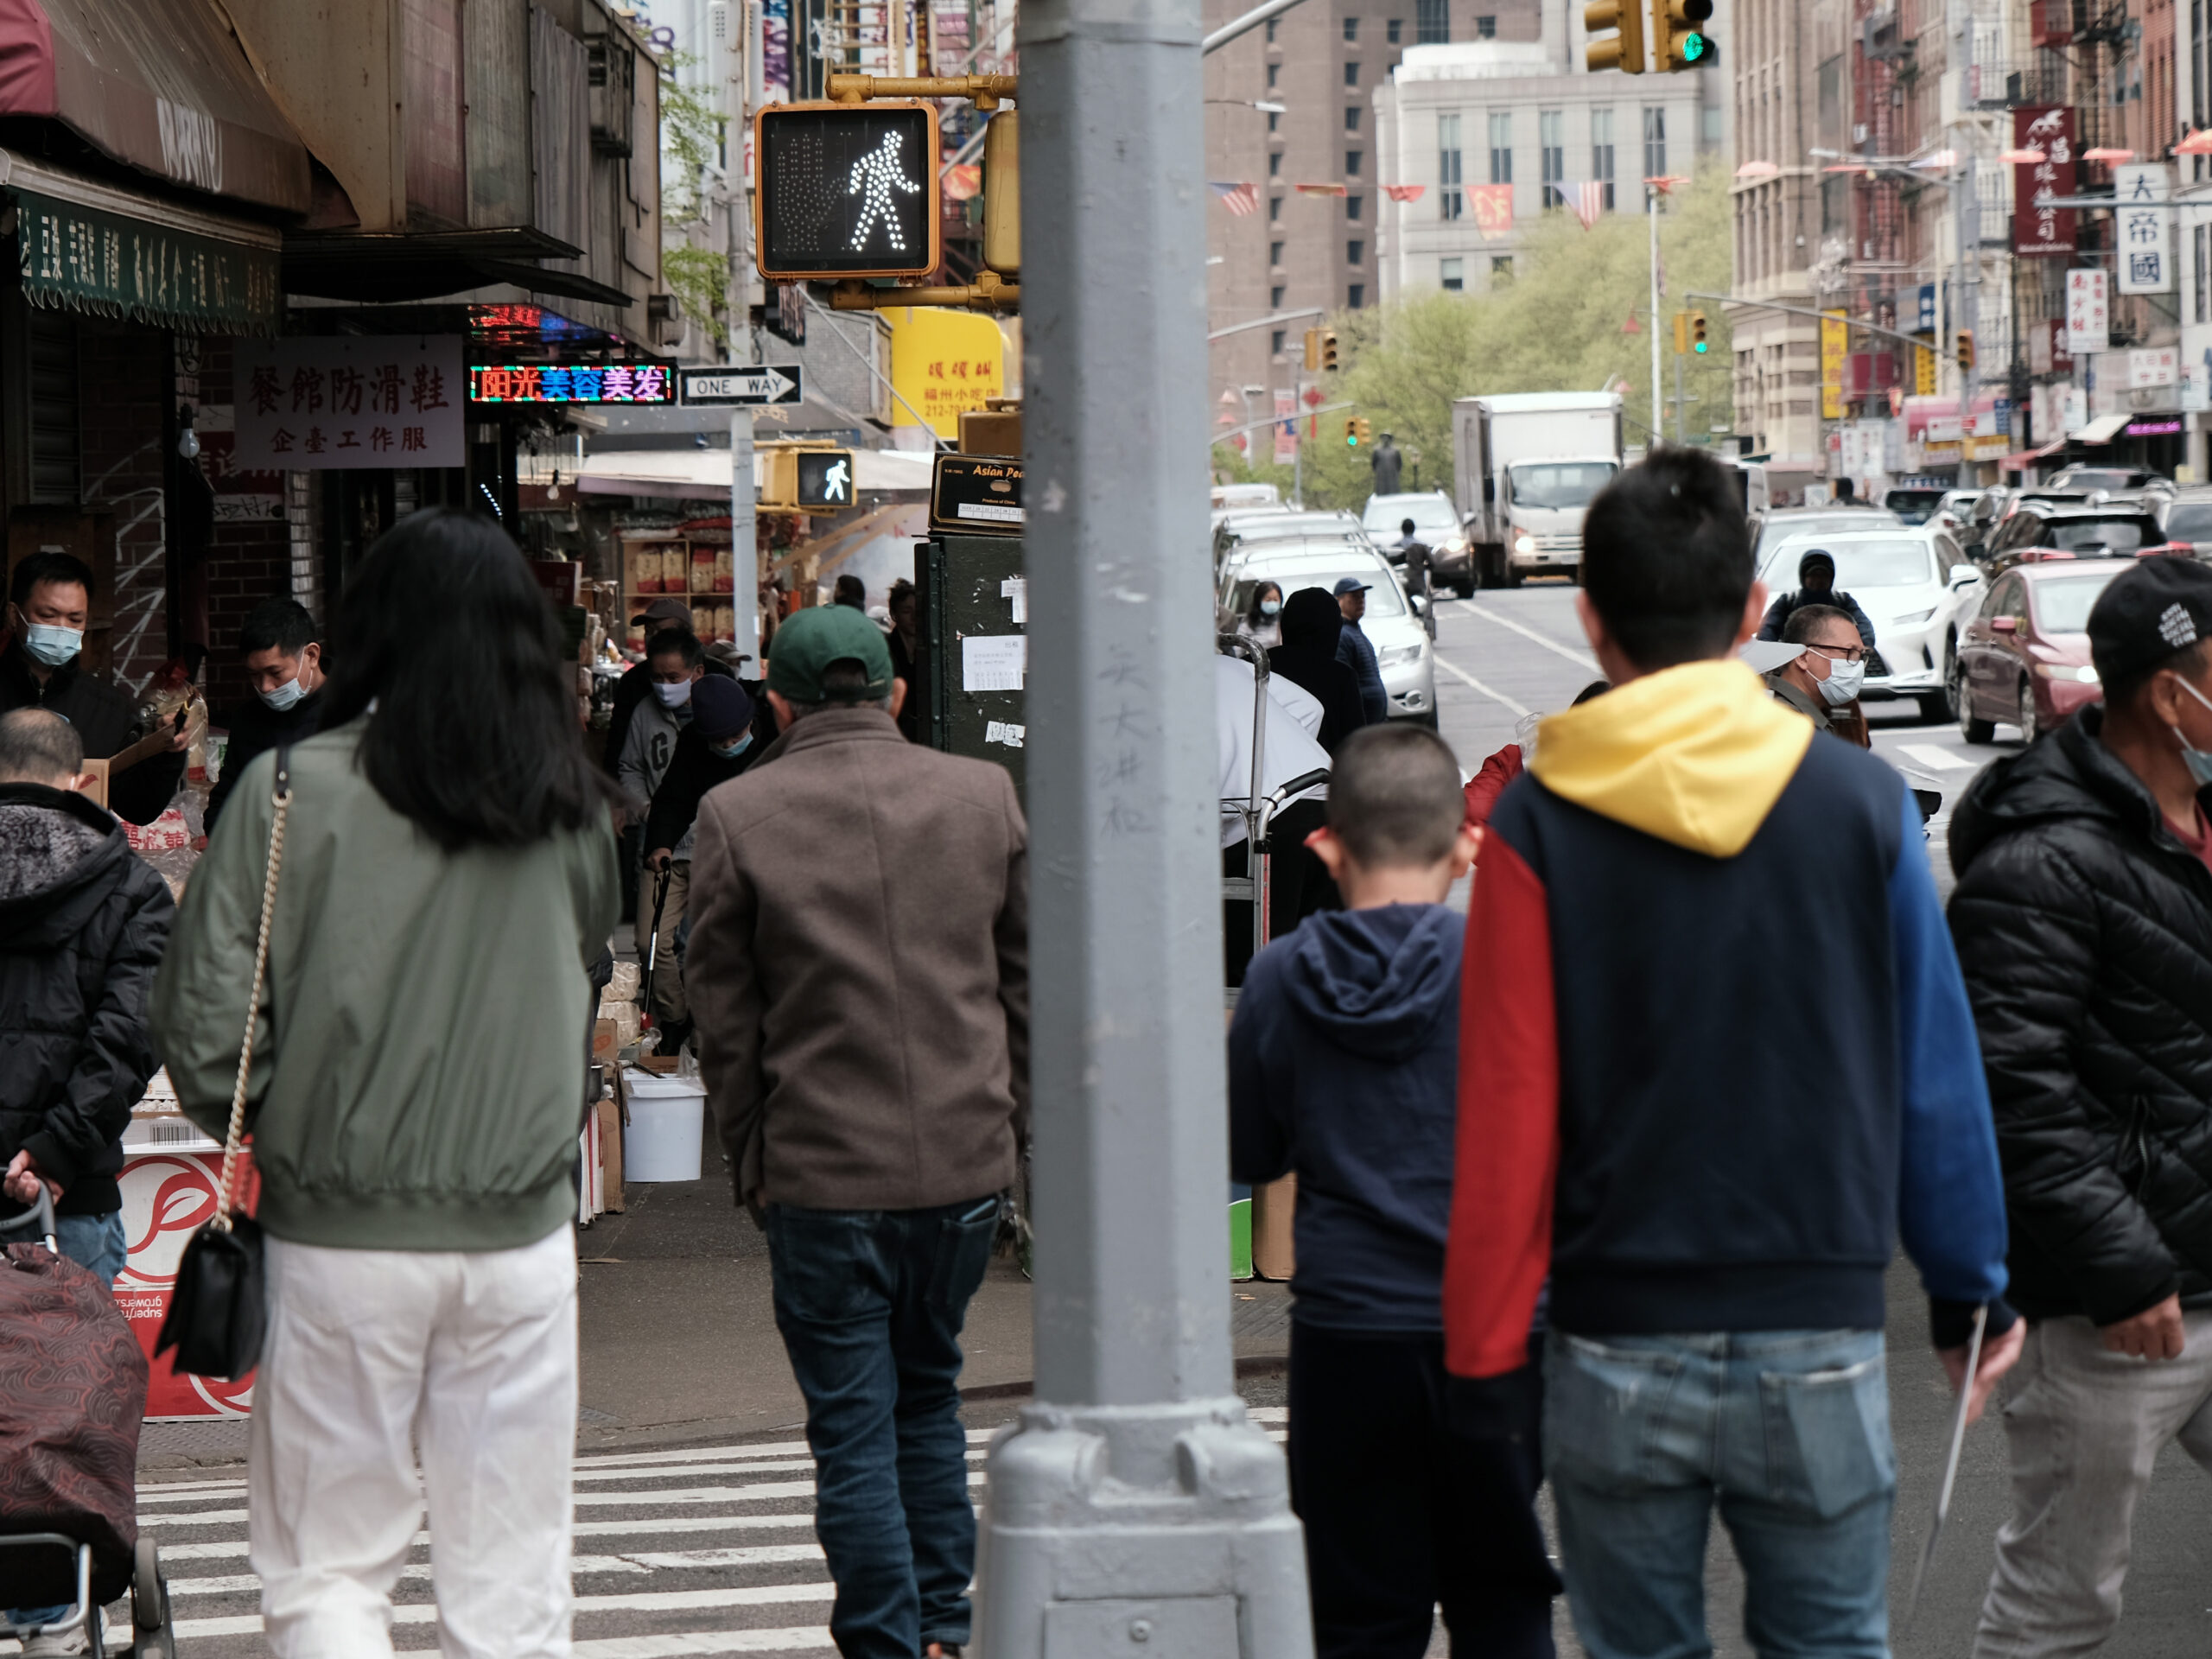 1 in 10 Asian Americans live in poverty. Their experiences vary widely, research says